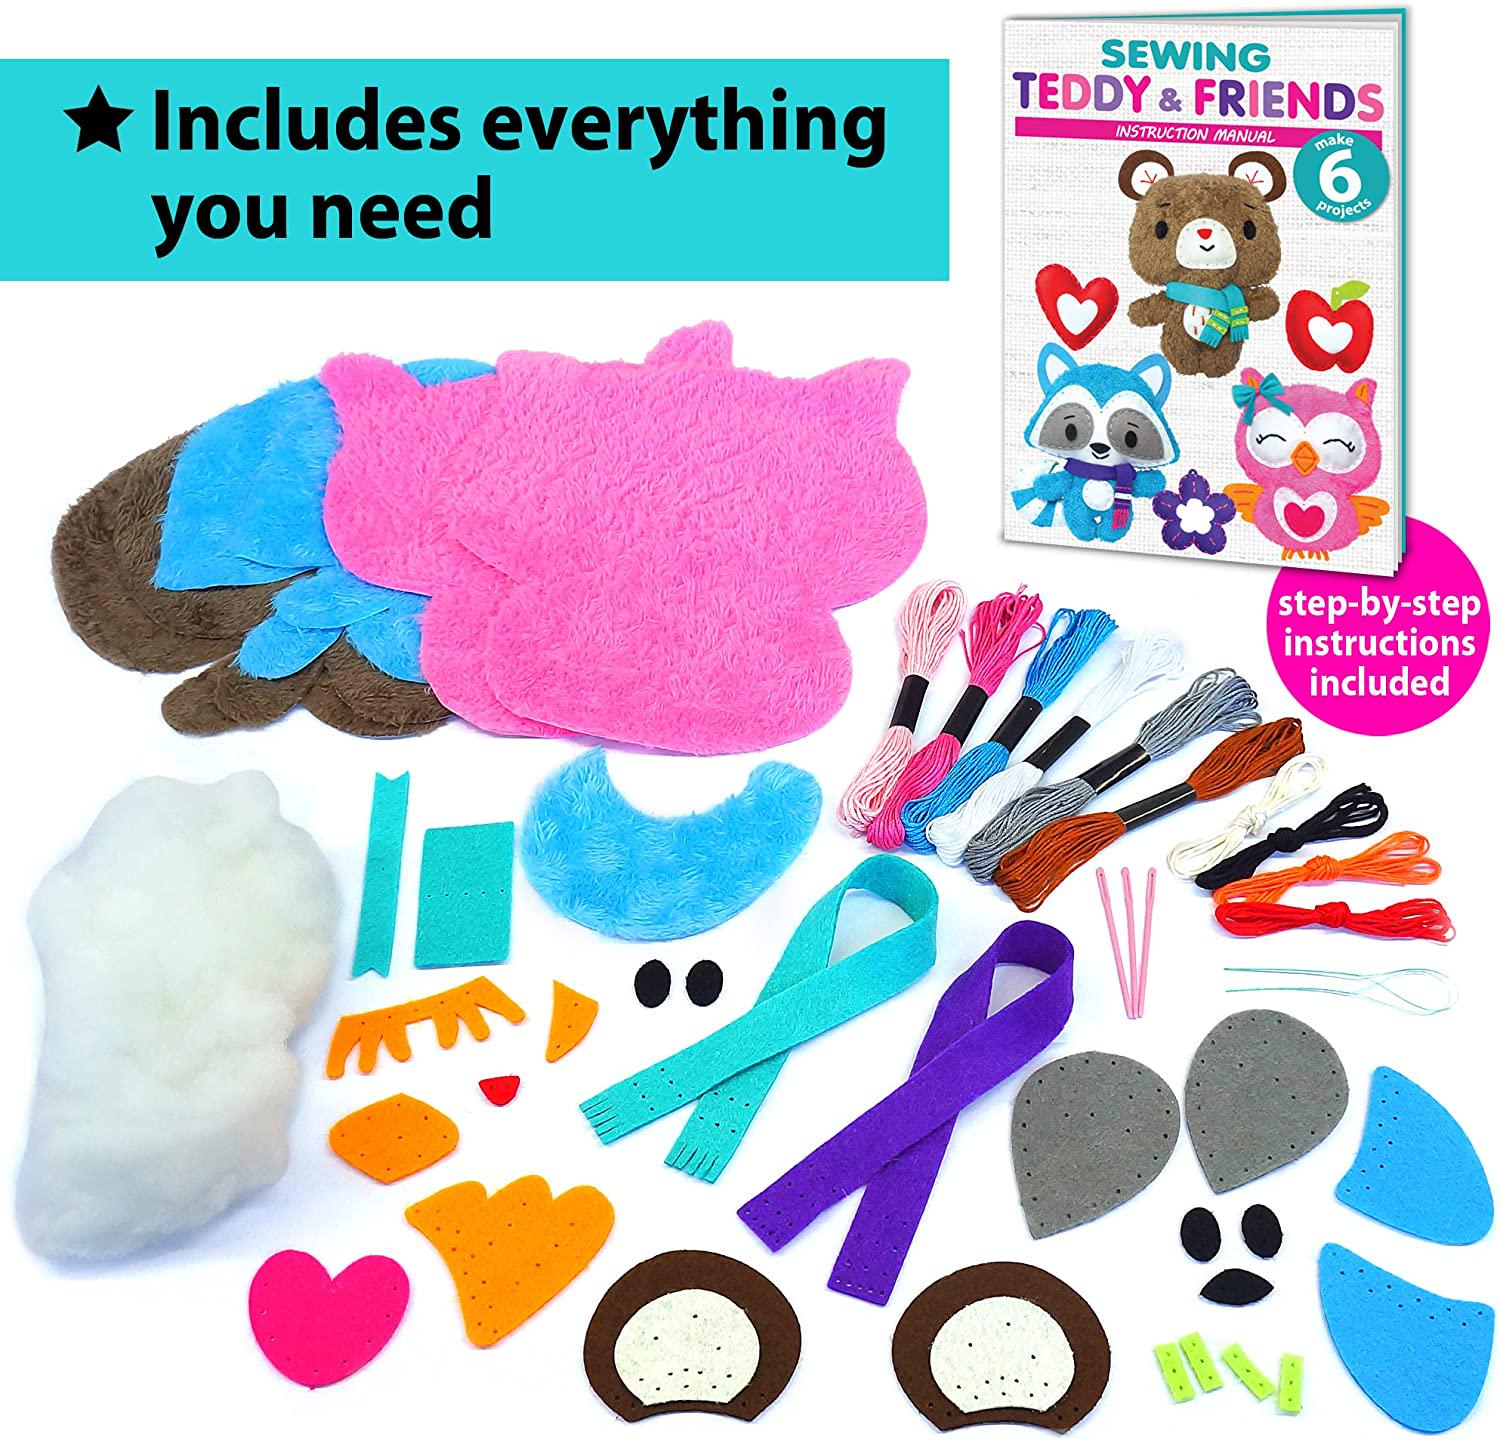 KRAFUN, KraFun Sewing Kit for Kids Age 7 8 9 10 11 12 Beginner My First Art and Craft, Includes 3 Stuffed Animal Dolls, Instruction and Plush Felt Materials for Learn to Sew, Embroidery Skills - Teddy and Friends